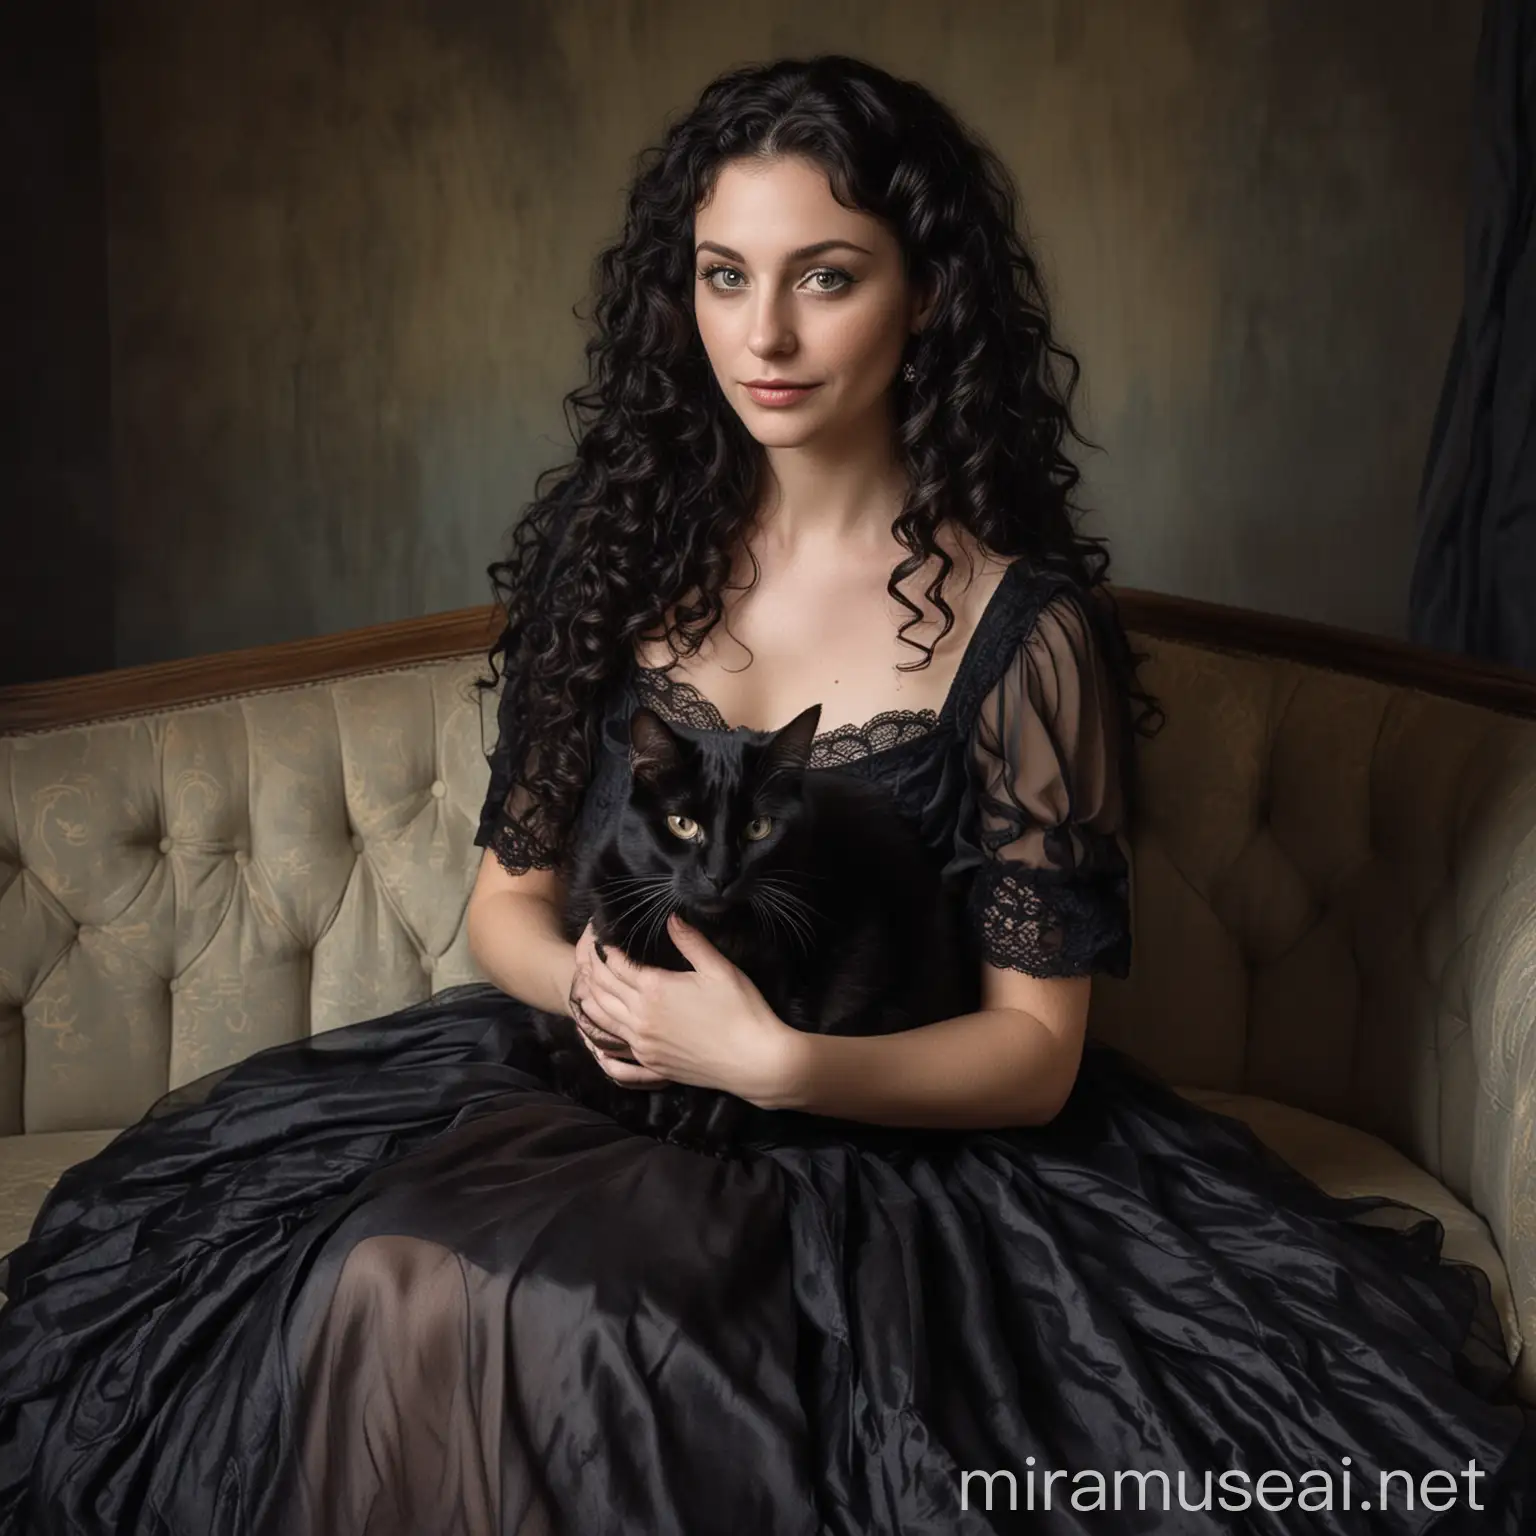 Elegant Woman with Black Cat Graceful Lady with Long Curly Hair and Feline Companion